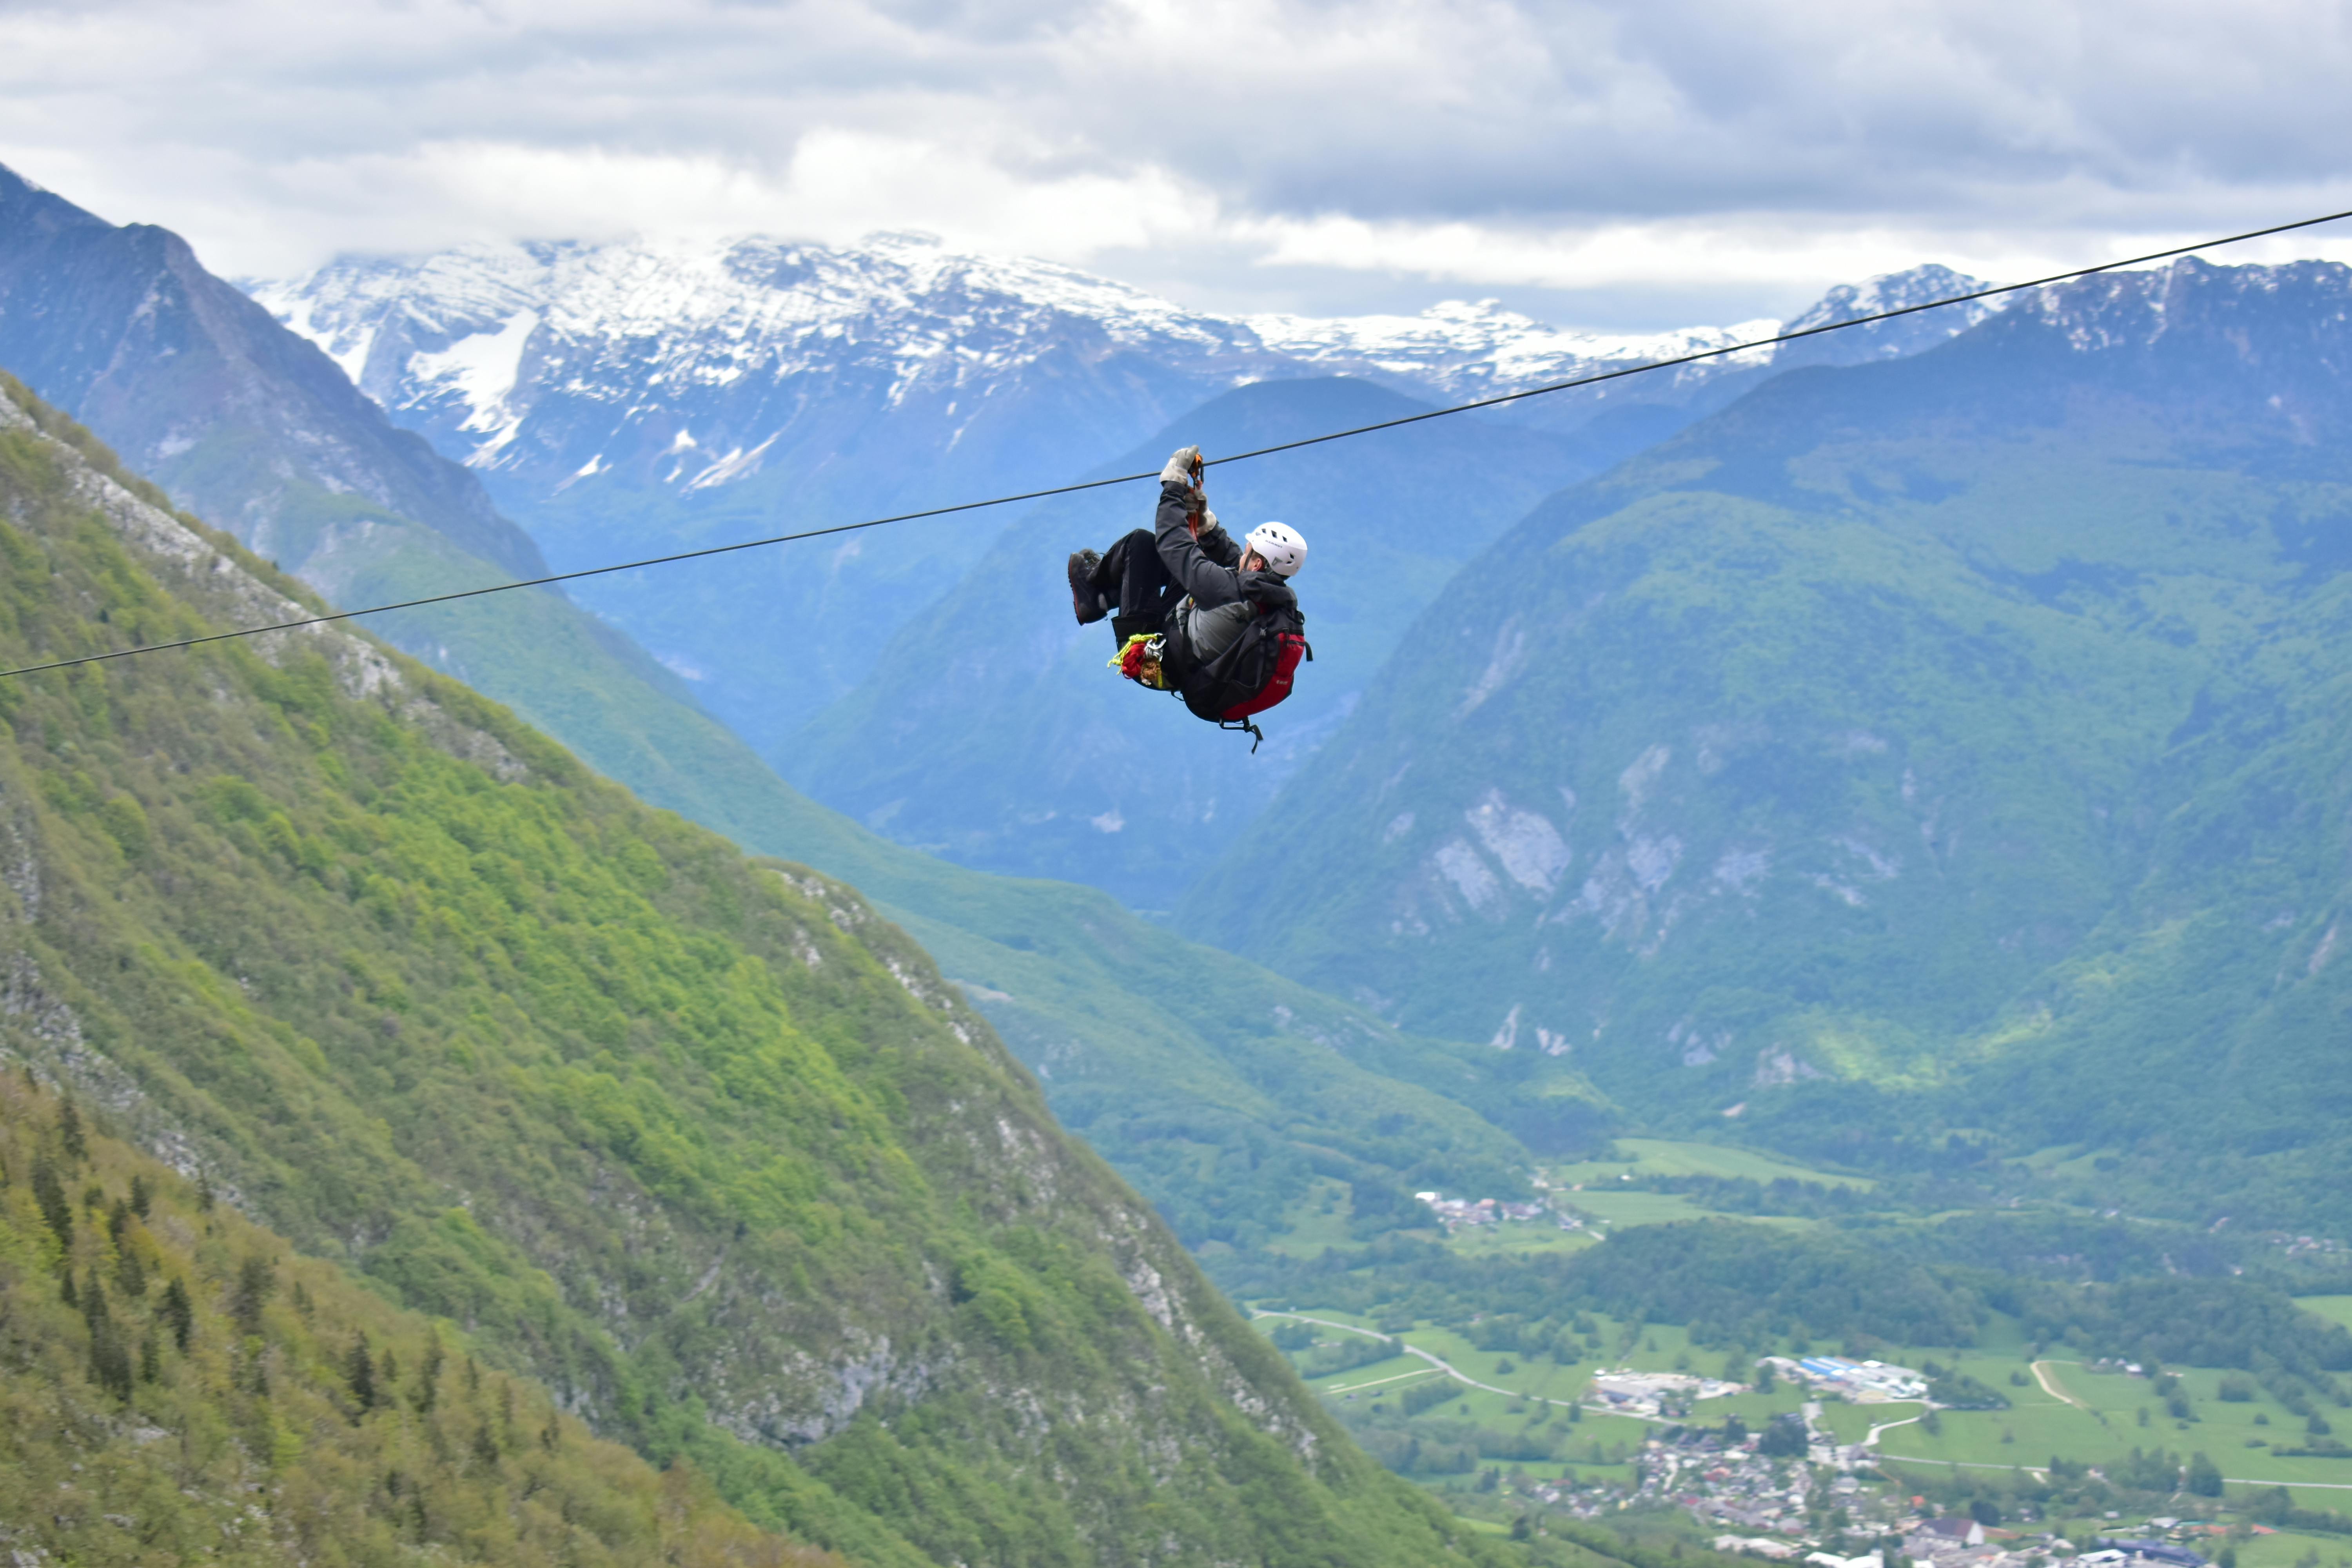 Zipline Adventure in Bovec valley over the Bovec and Soča rivers